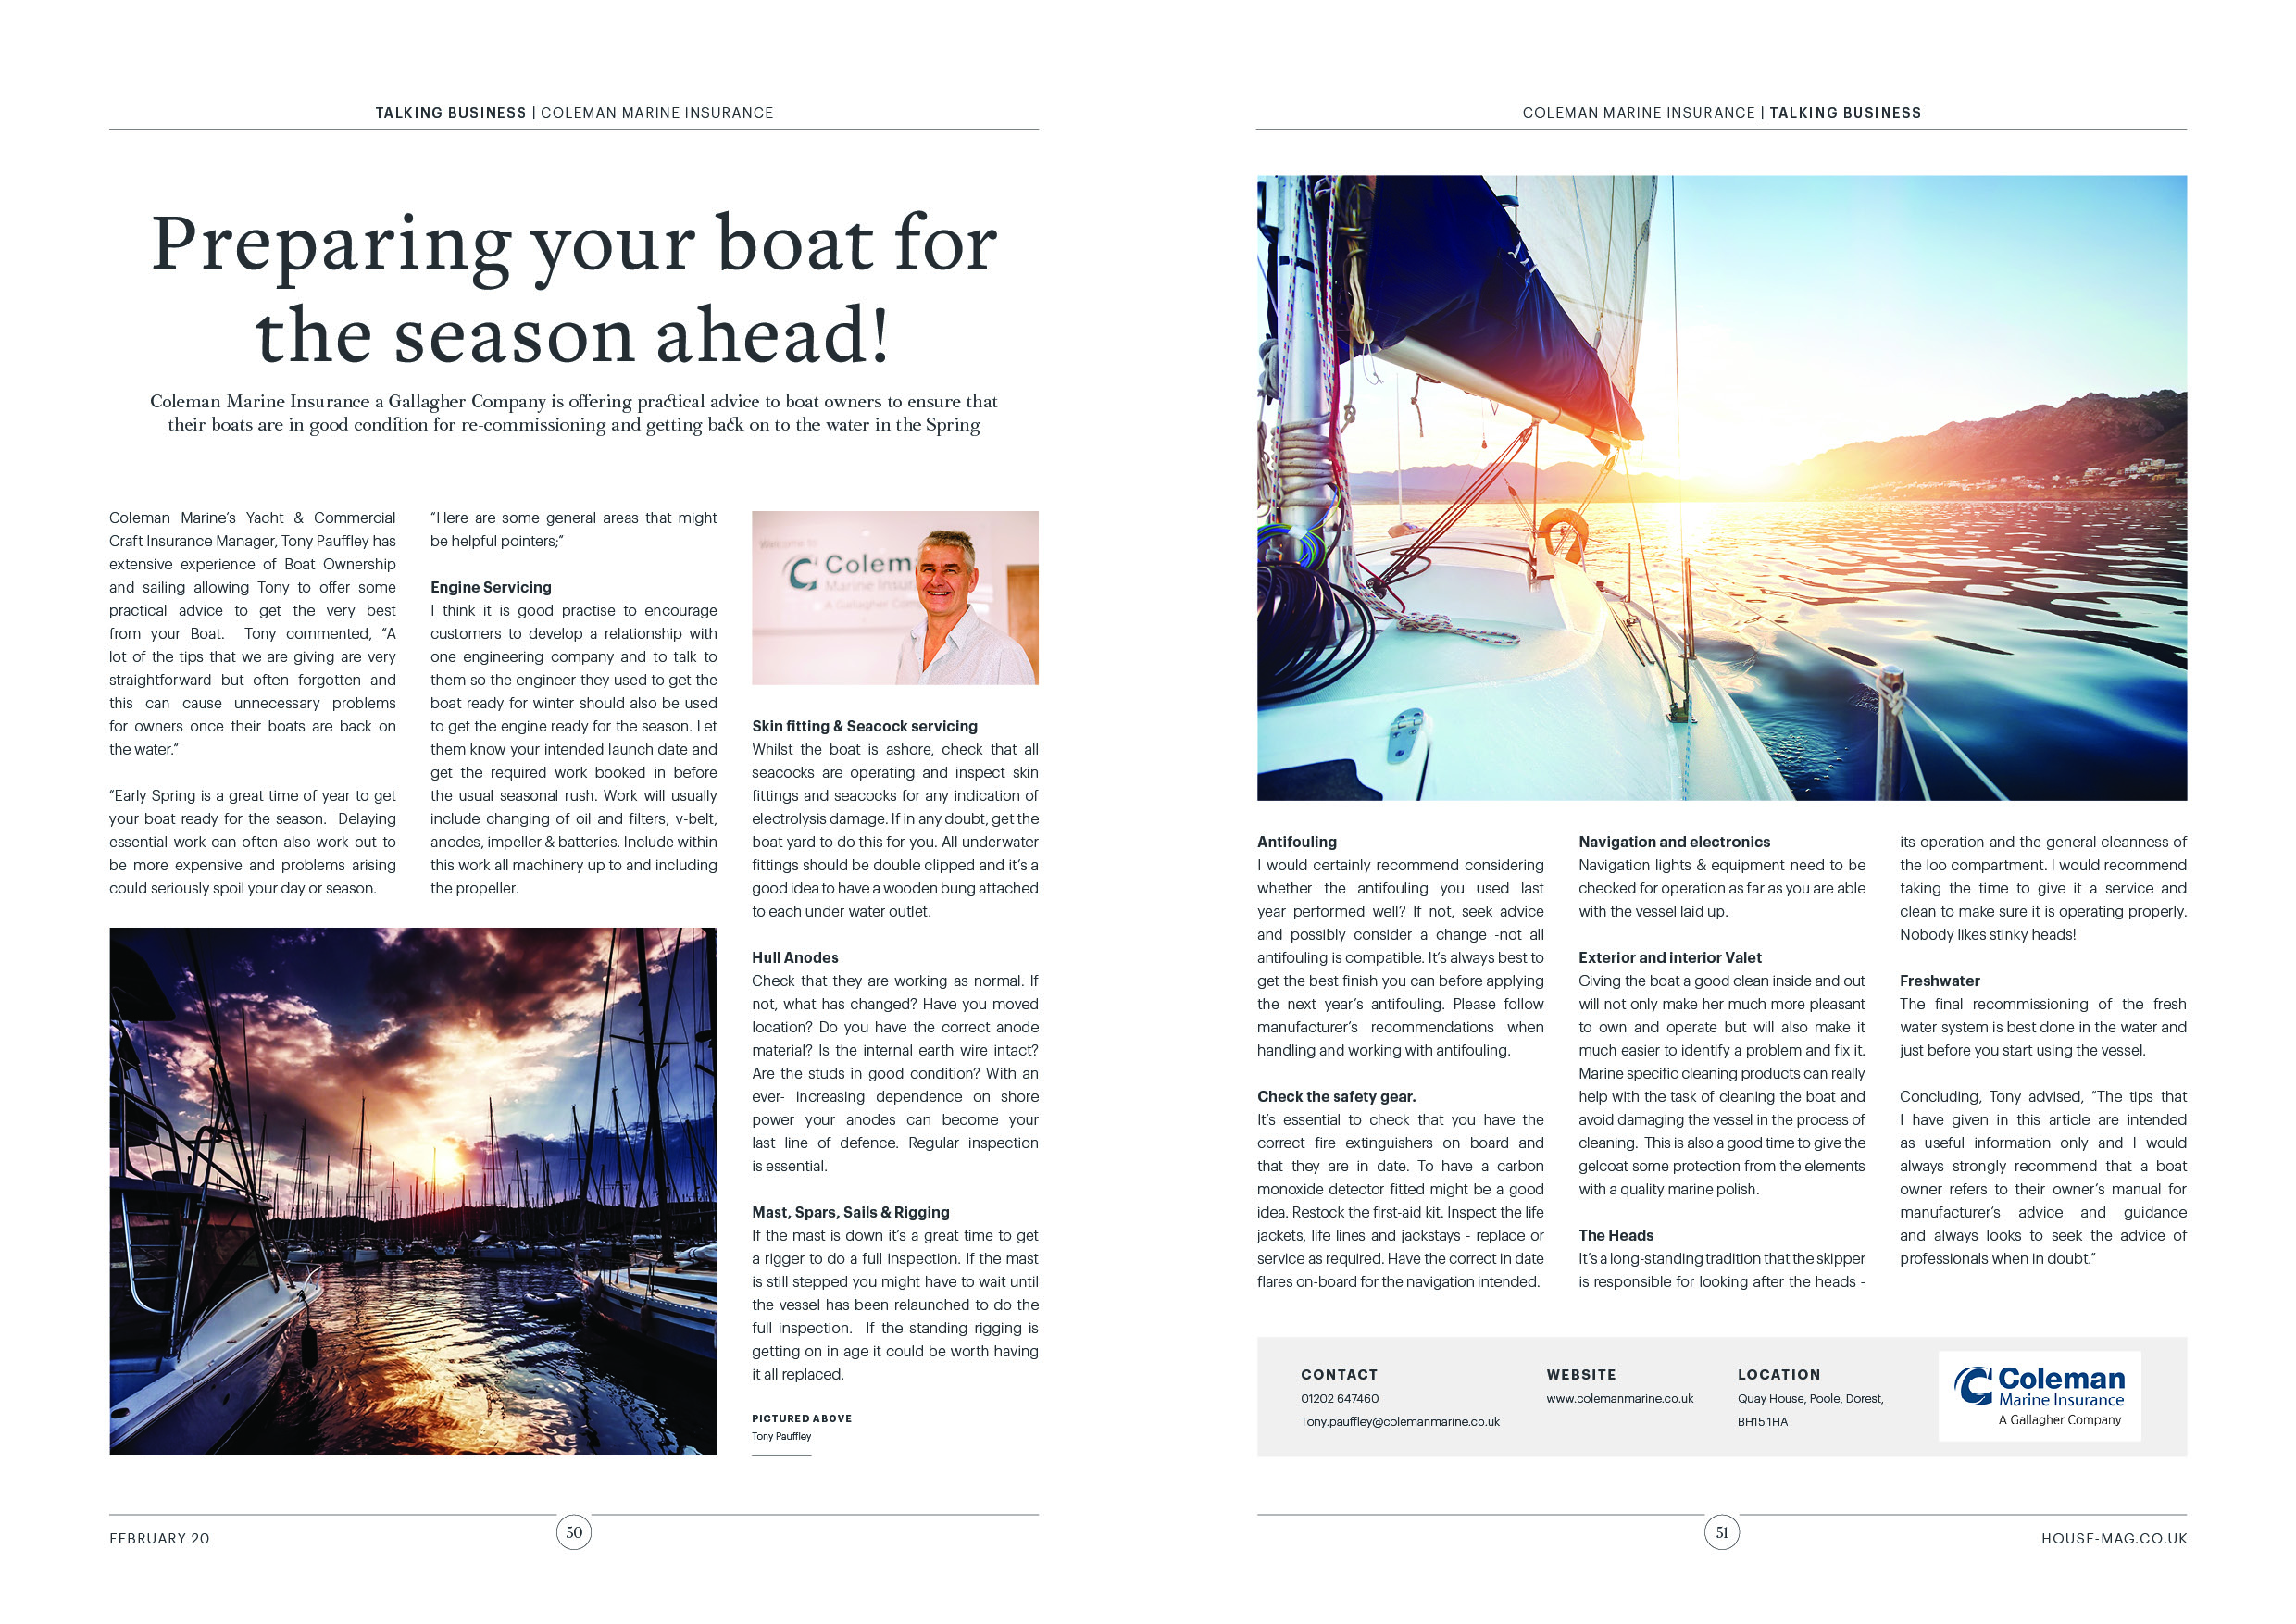 Preparing your boat for the season ahead